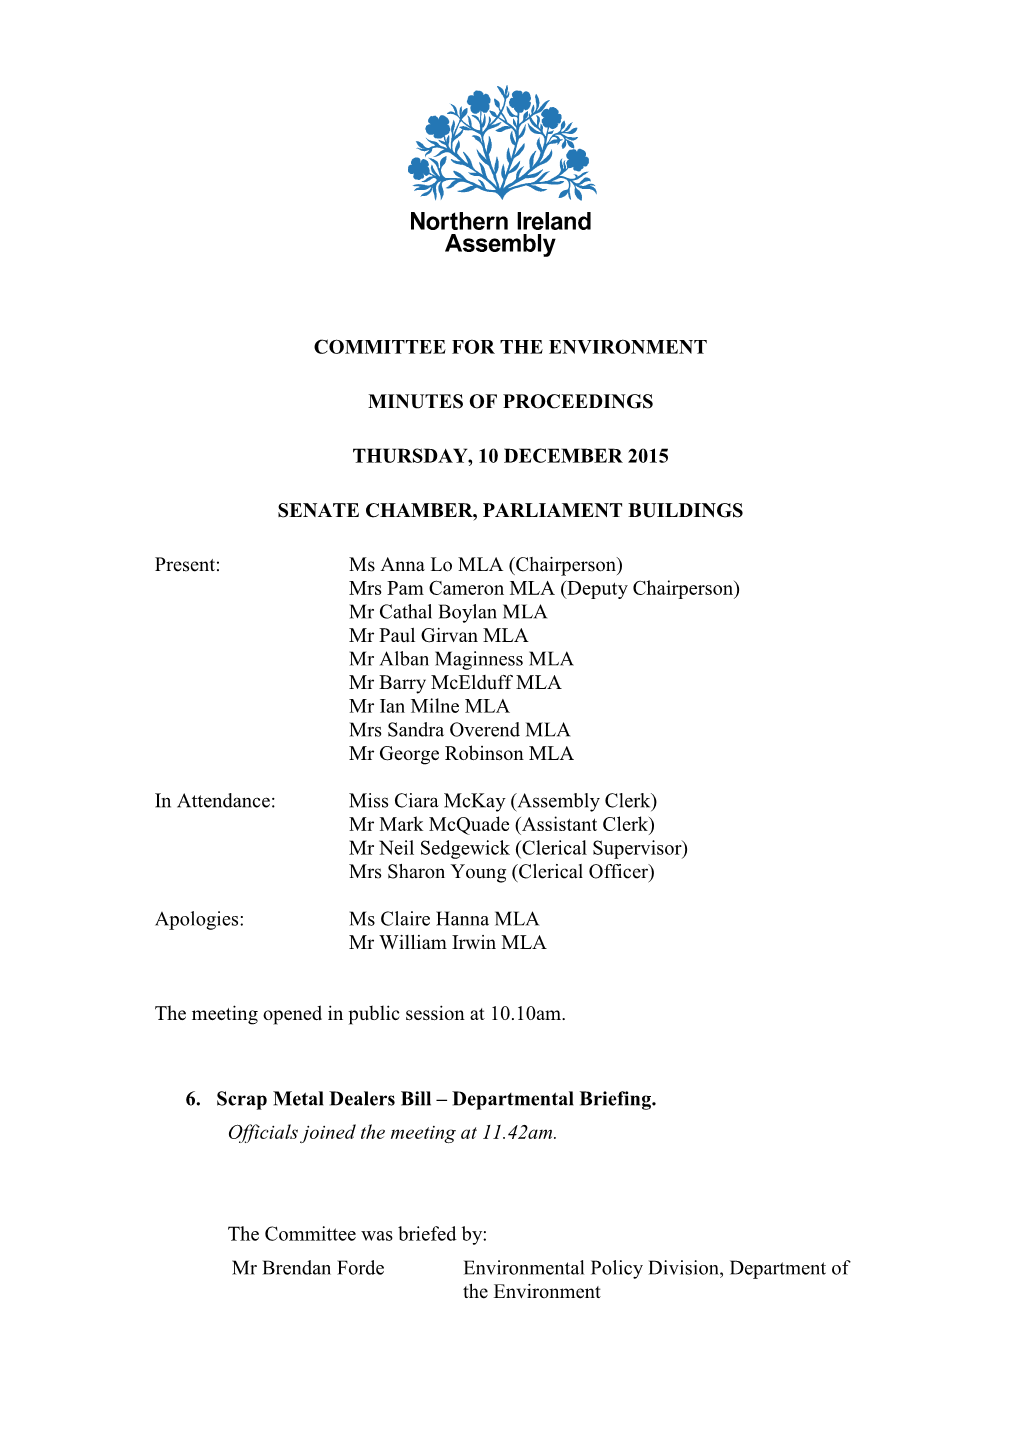 Committee for the Environment Minutes Of